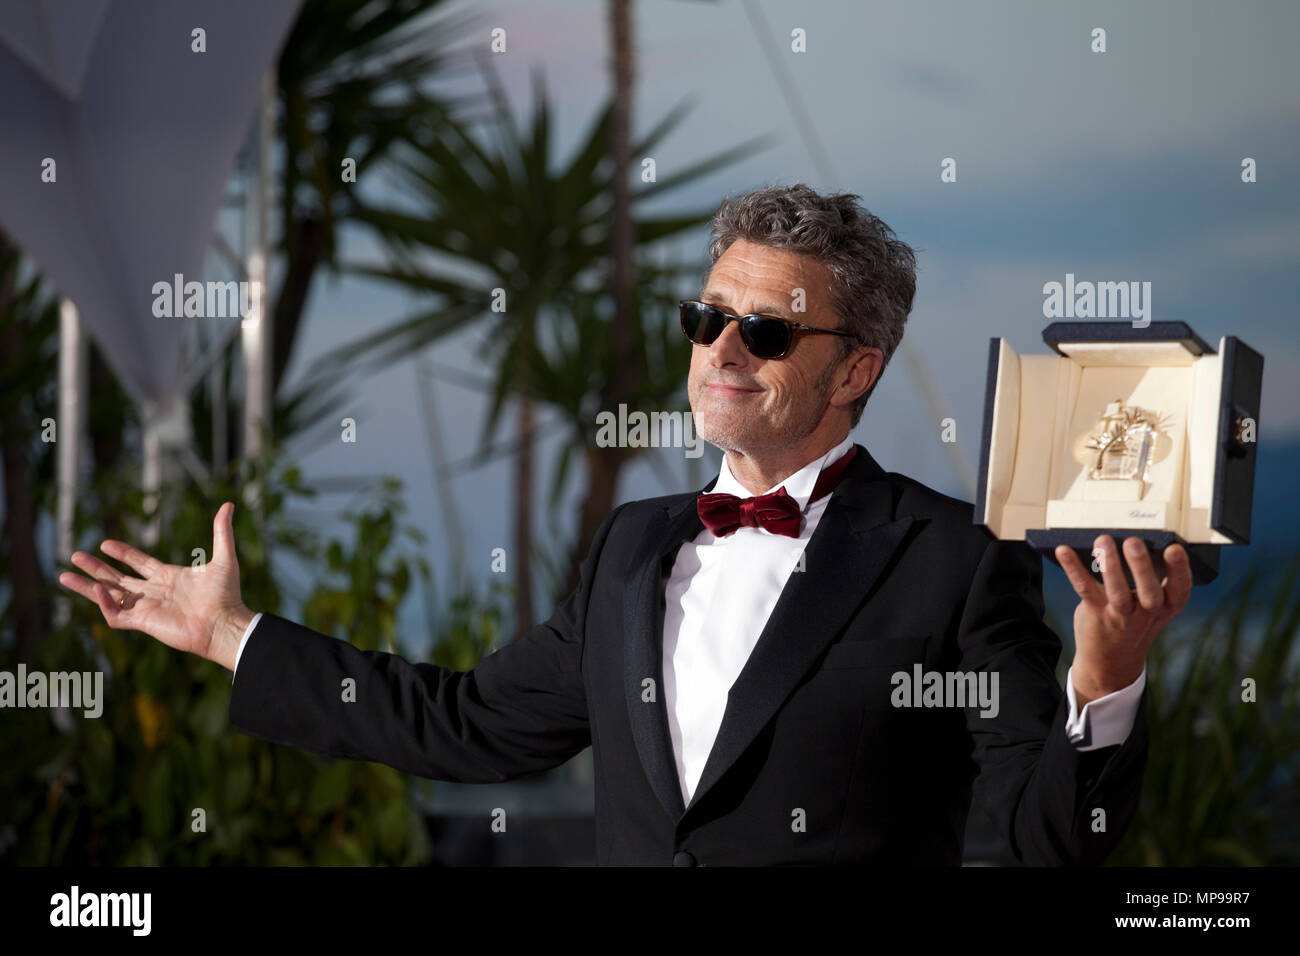 Director Pawel Pawlikowski, winner of the the Best Director prize for the film Zimna Wojna (Cold War) at the Award Winner’s photo call at the 71st Can Stock Photo